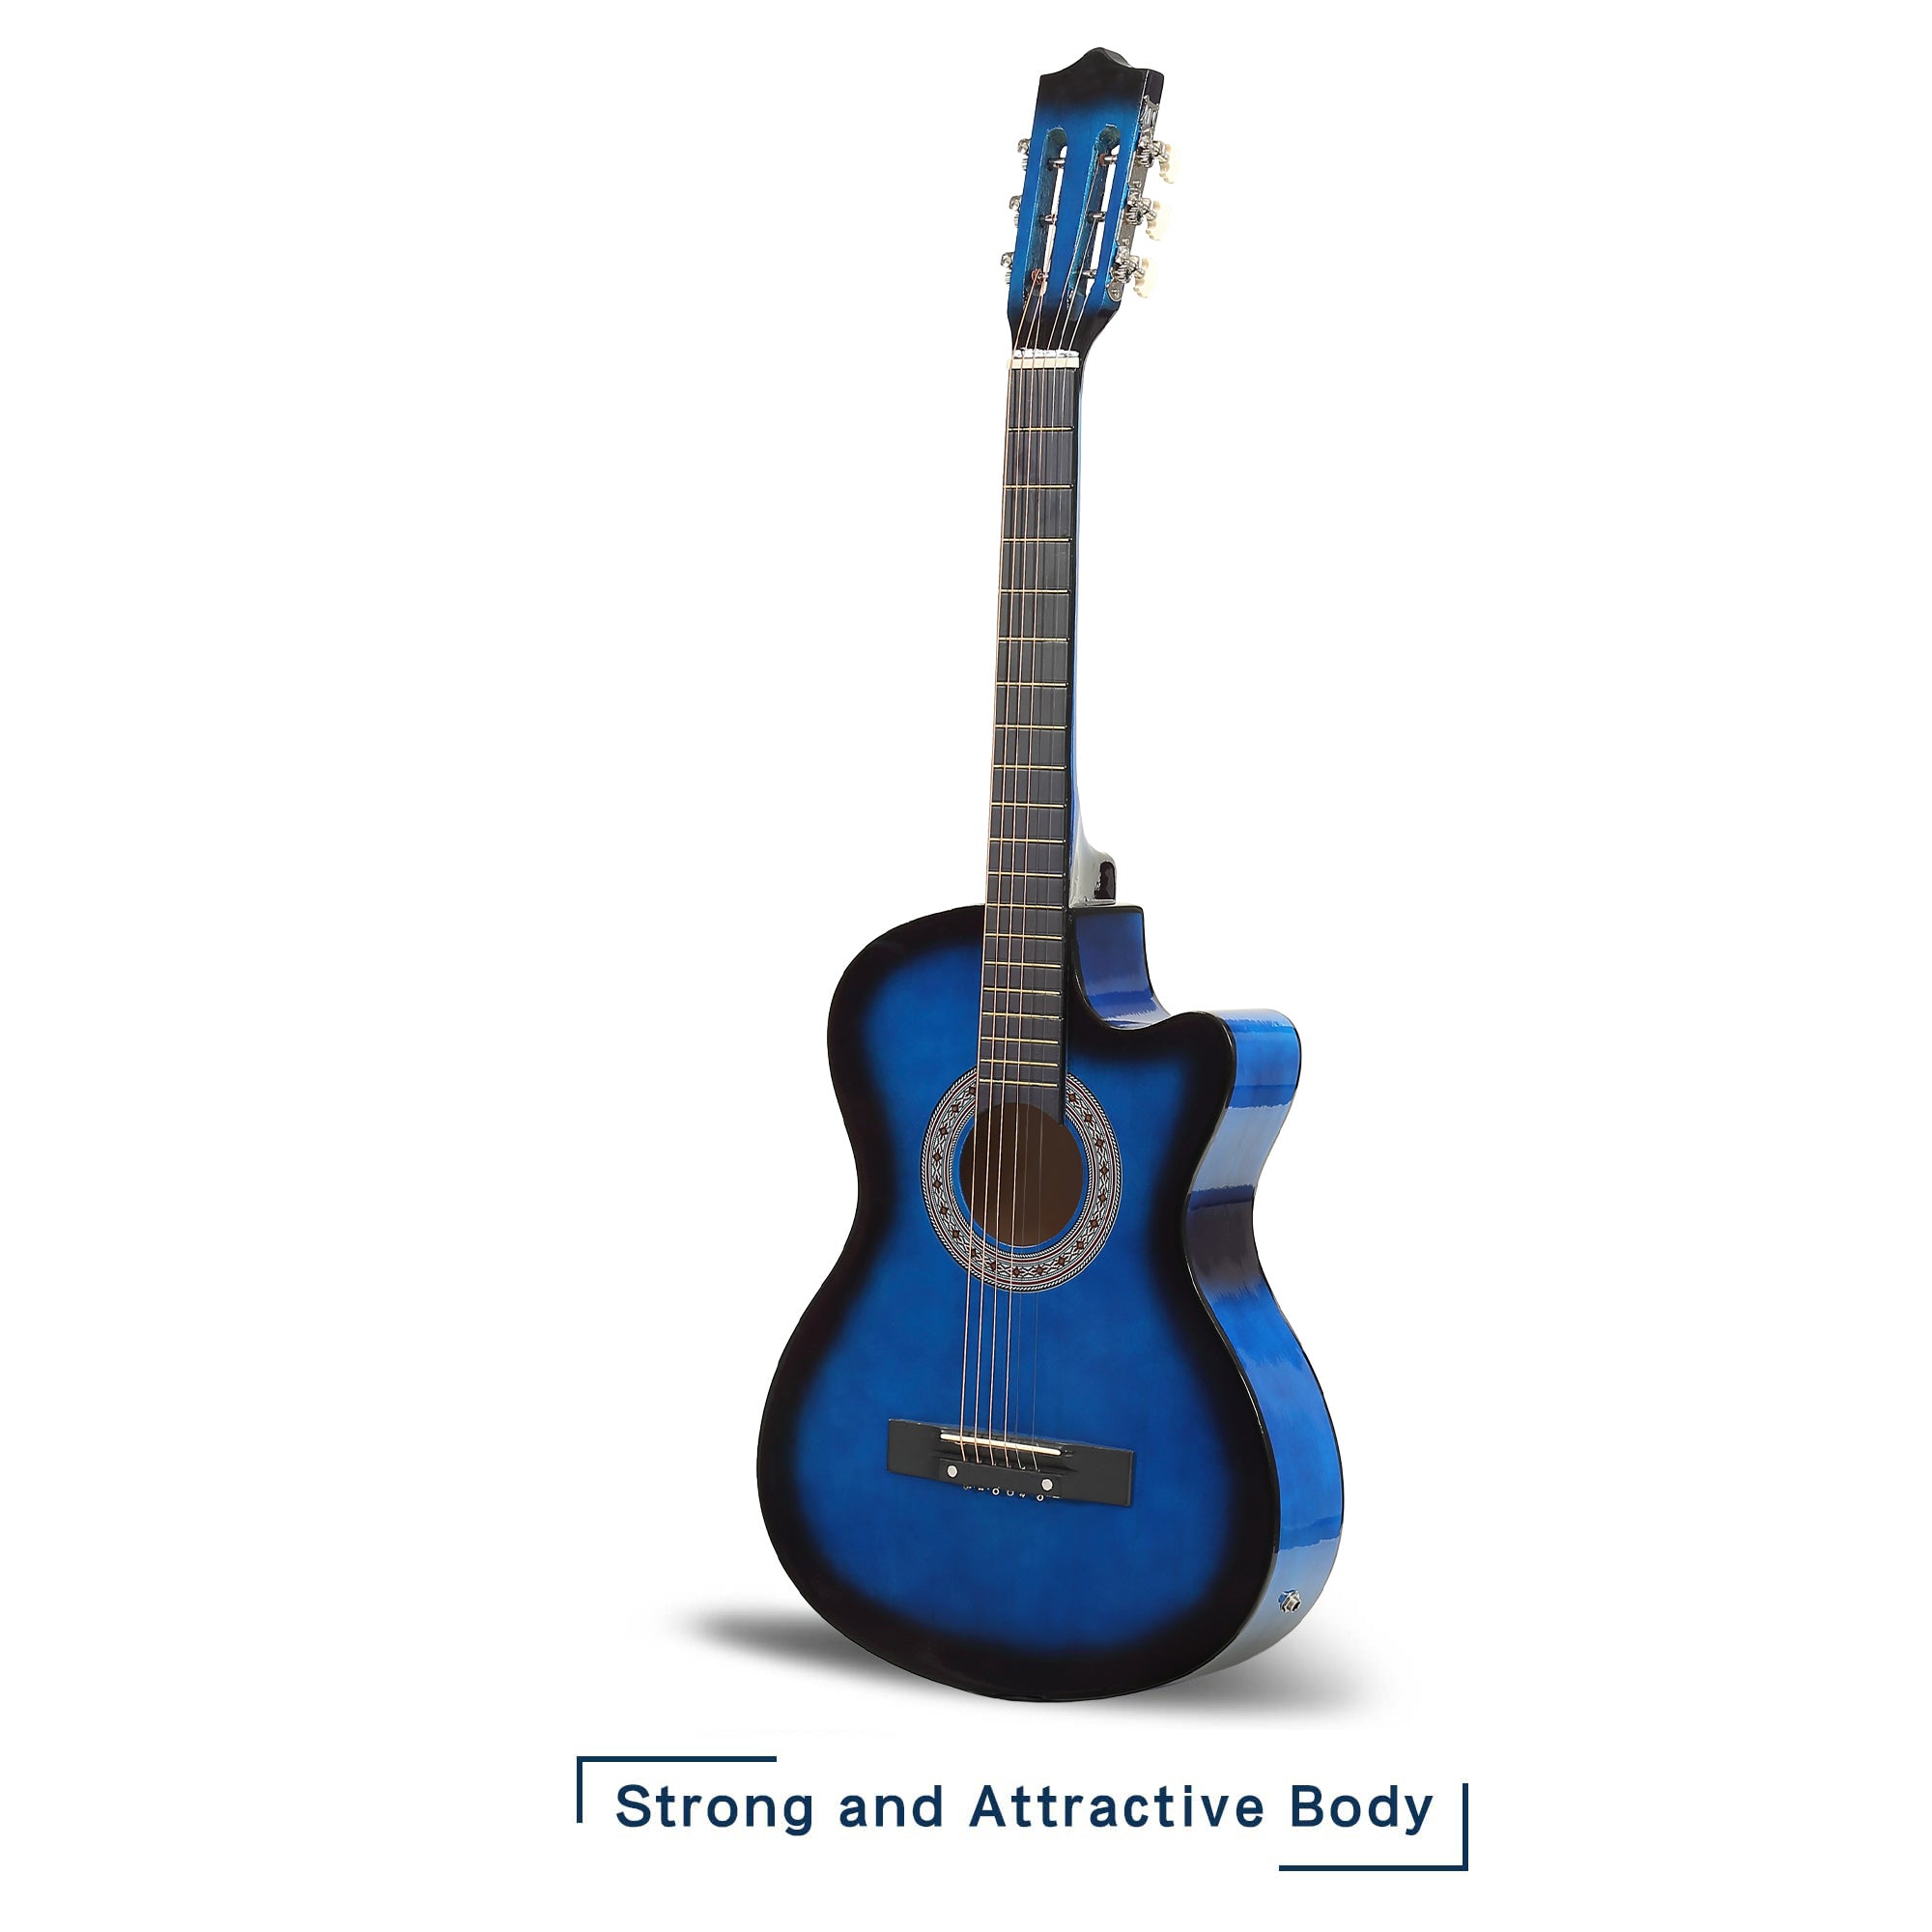 38" Acoustic Electric Guitar for Beginners All Wood Classic Guitar, Blue